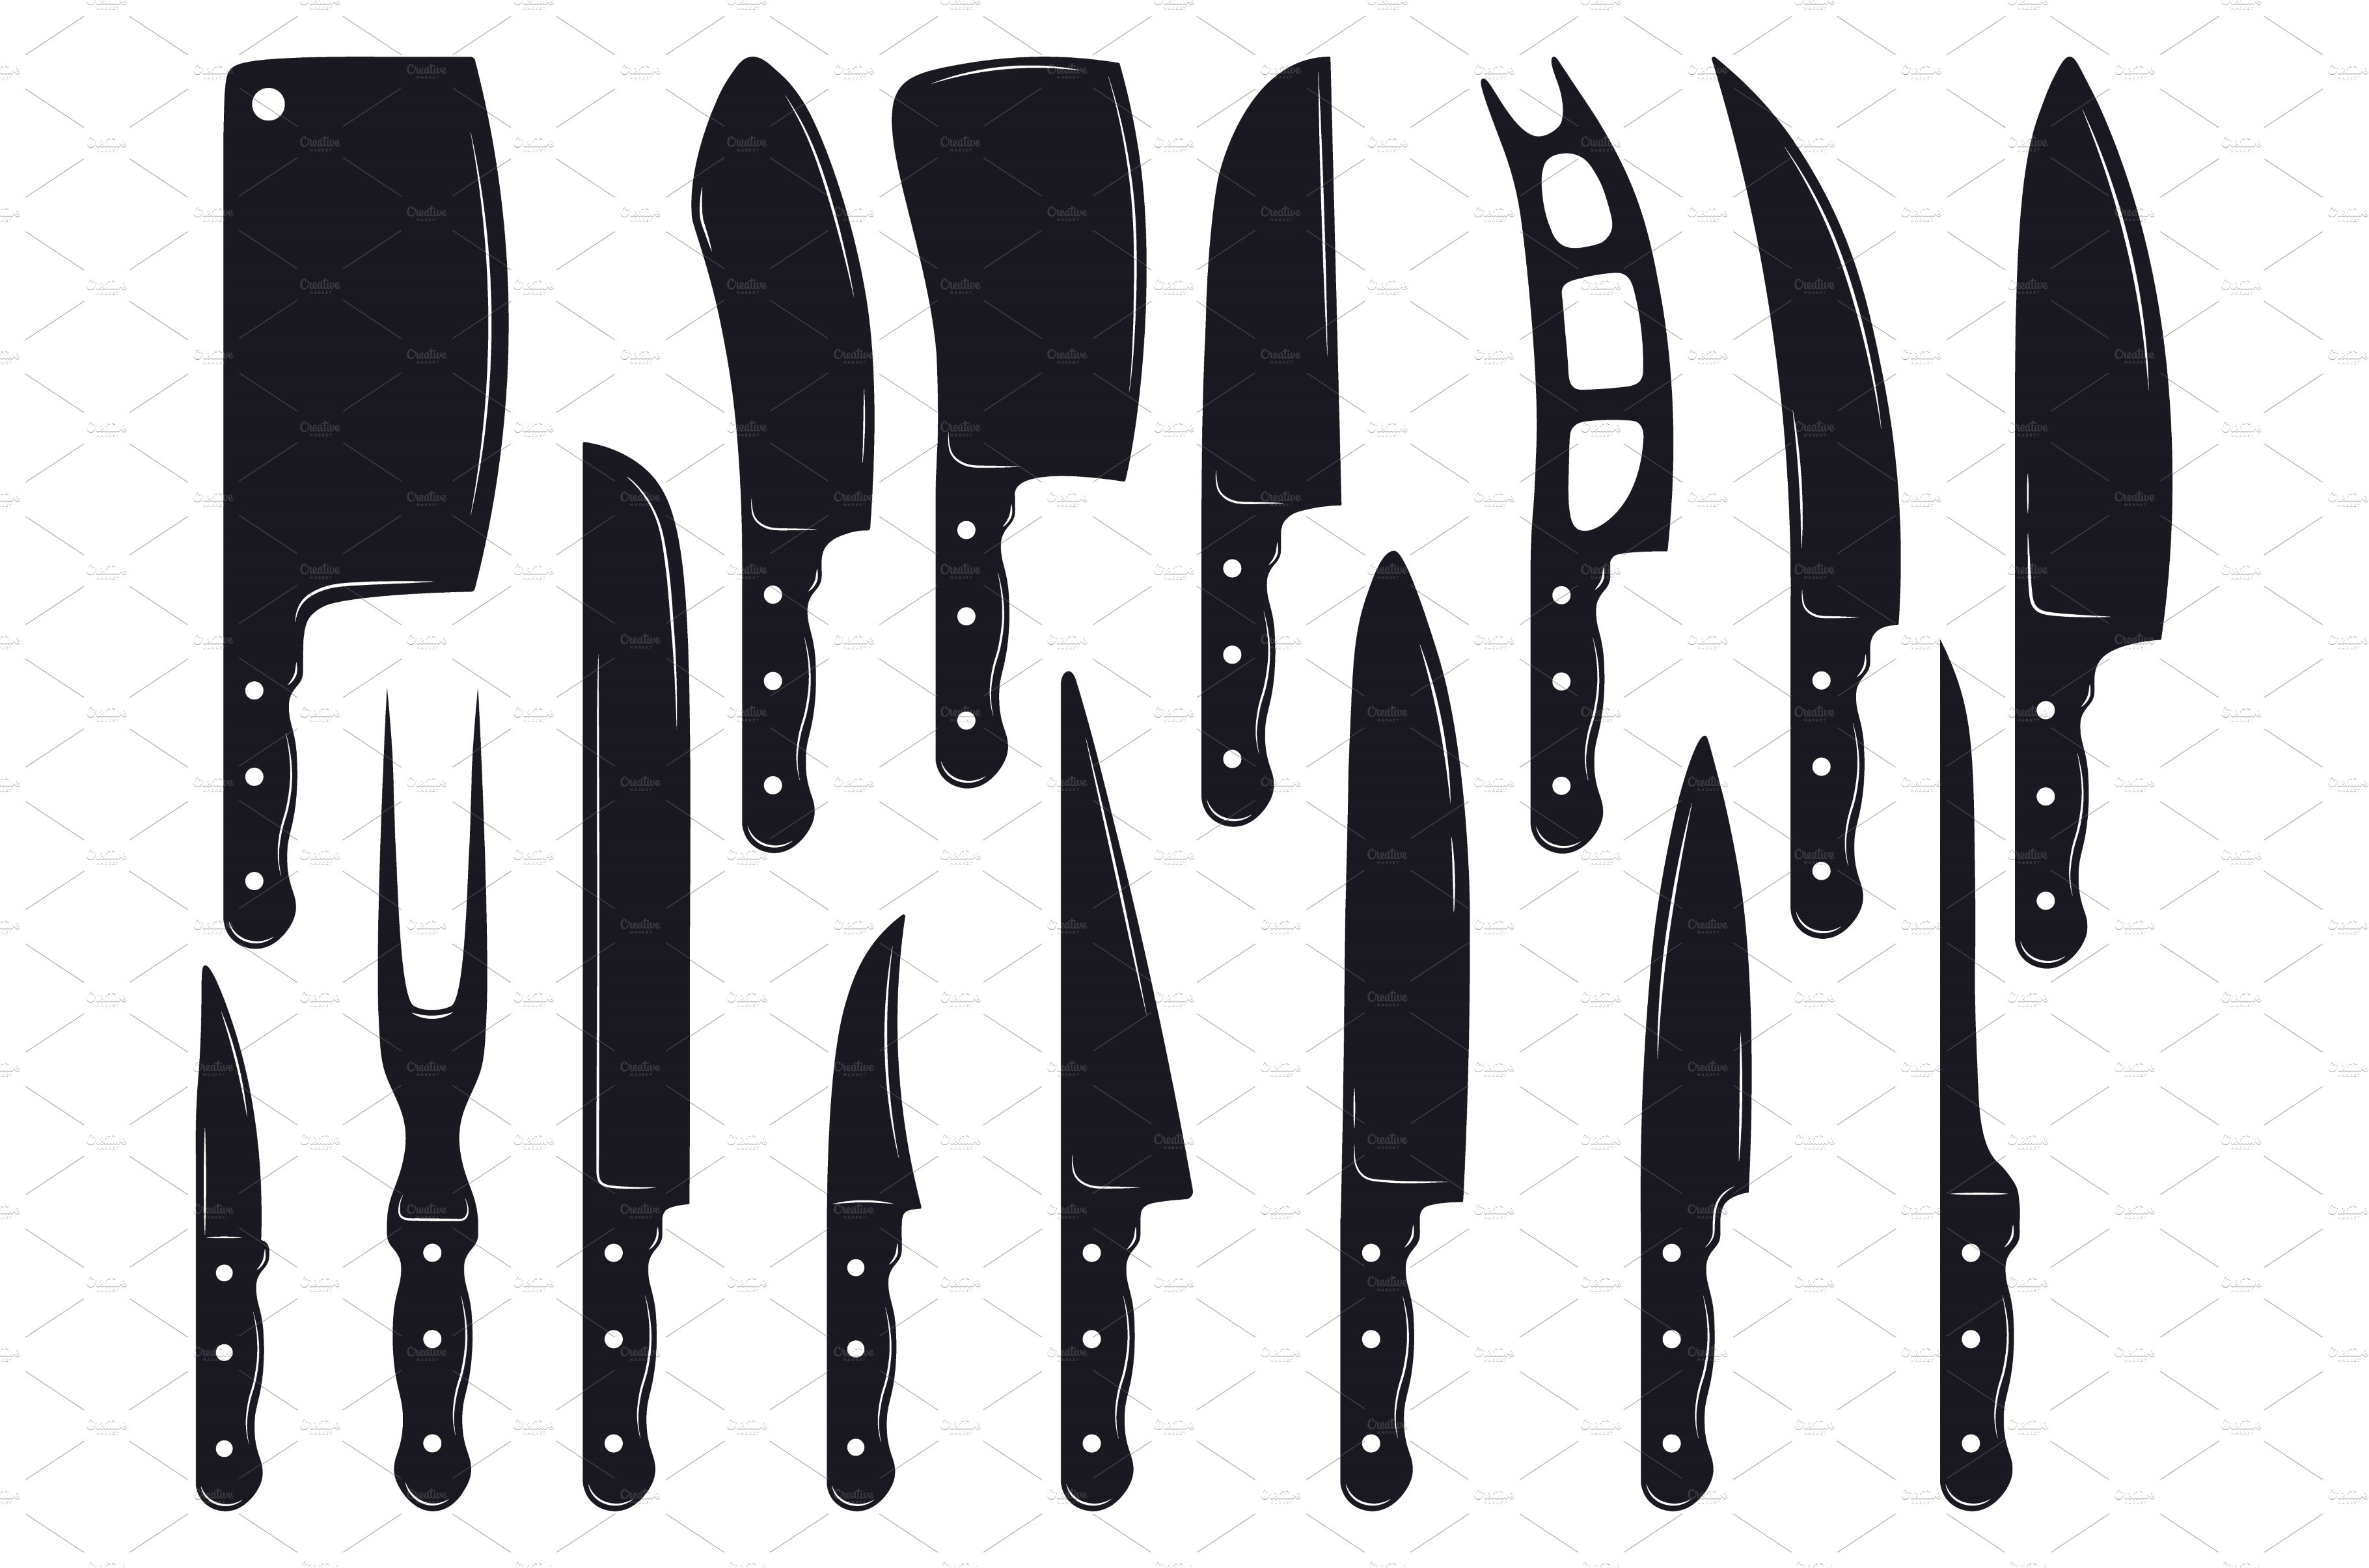 Meat knives. Butcher shop meat cover image.